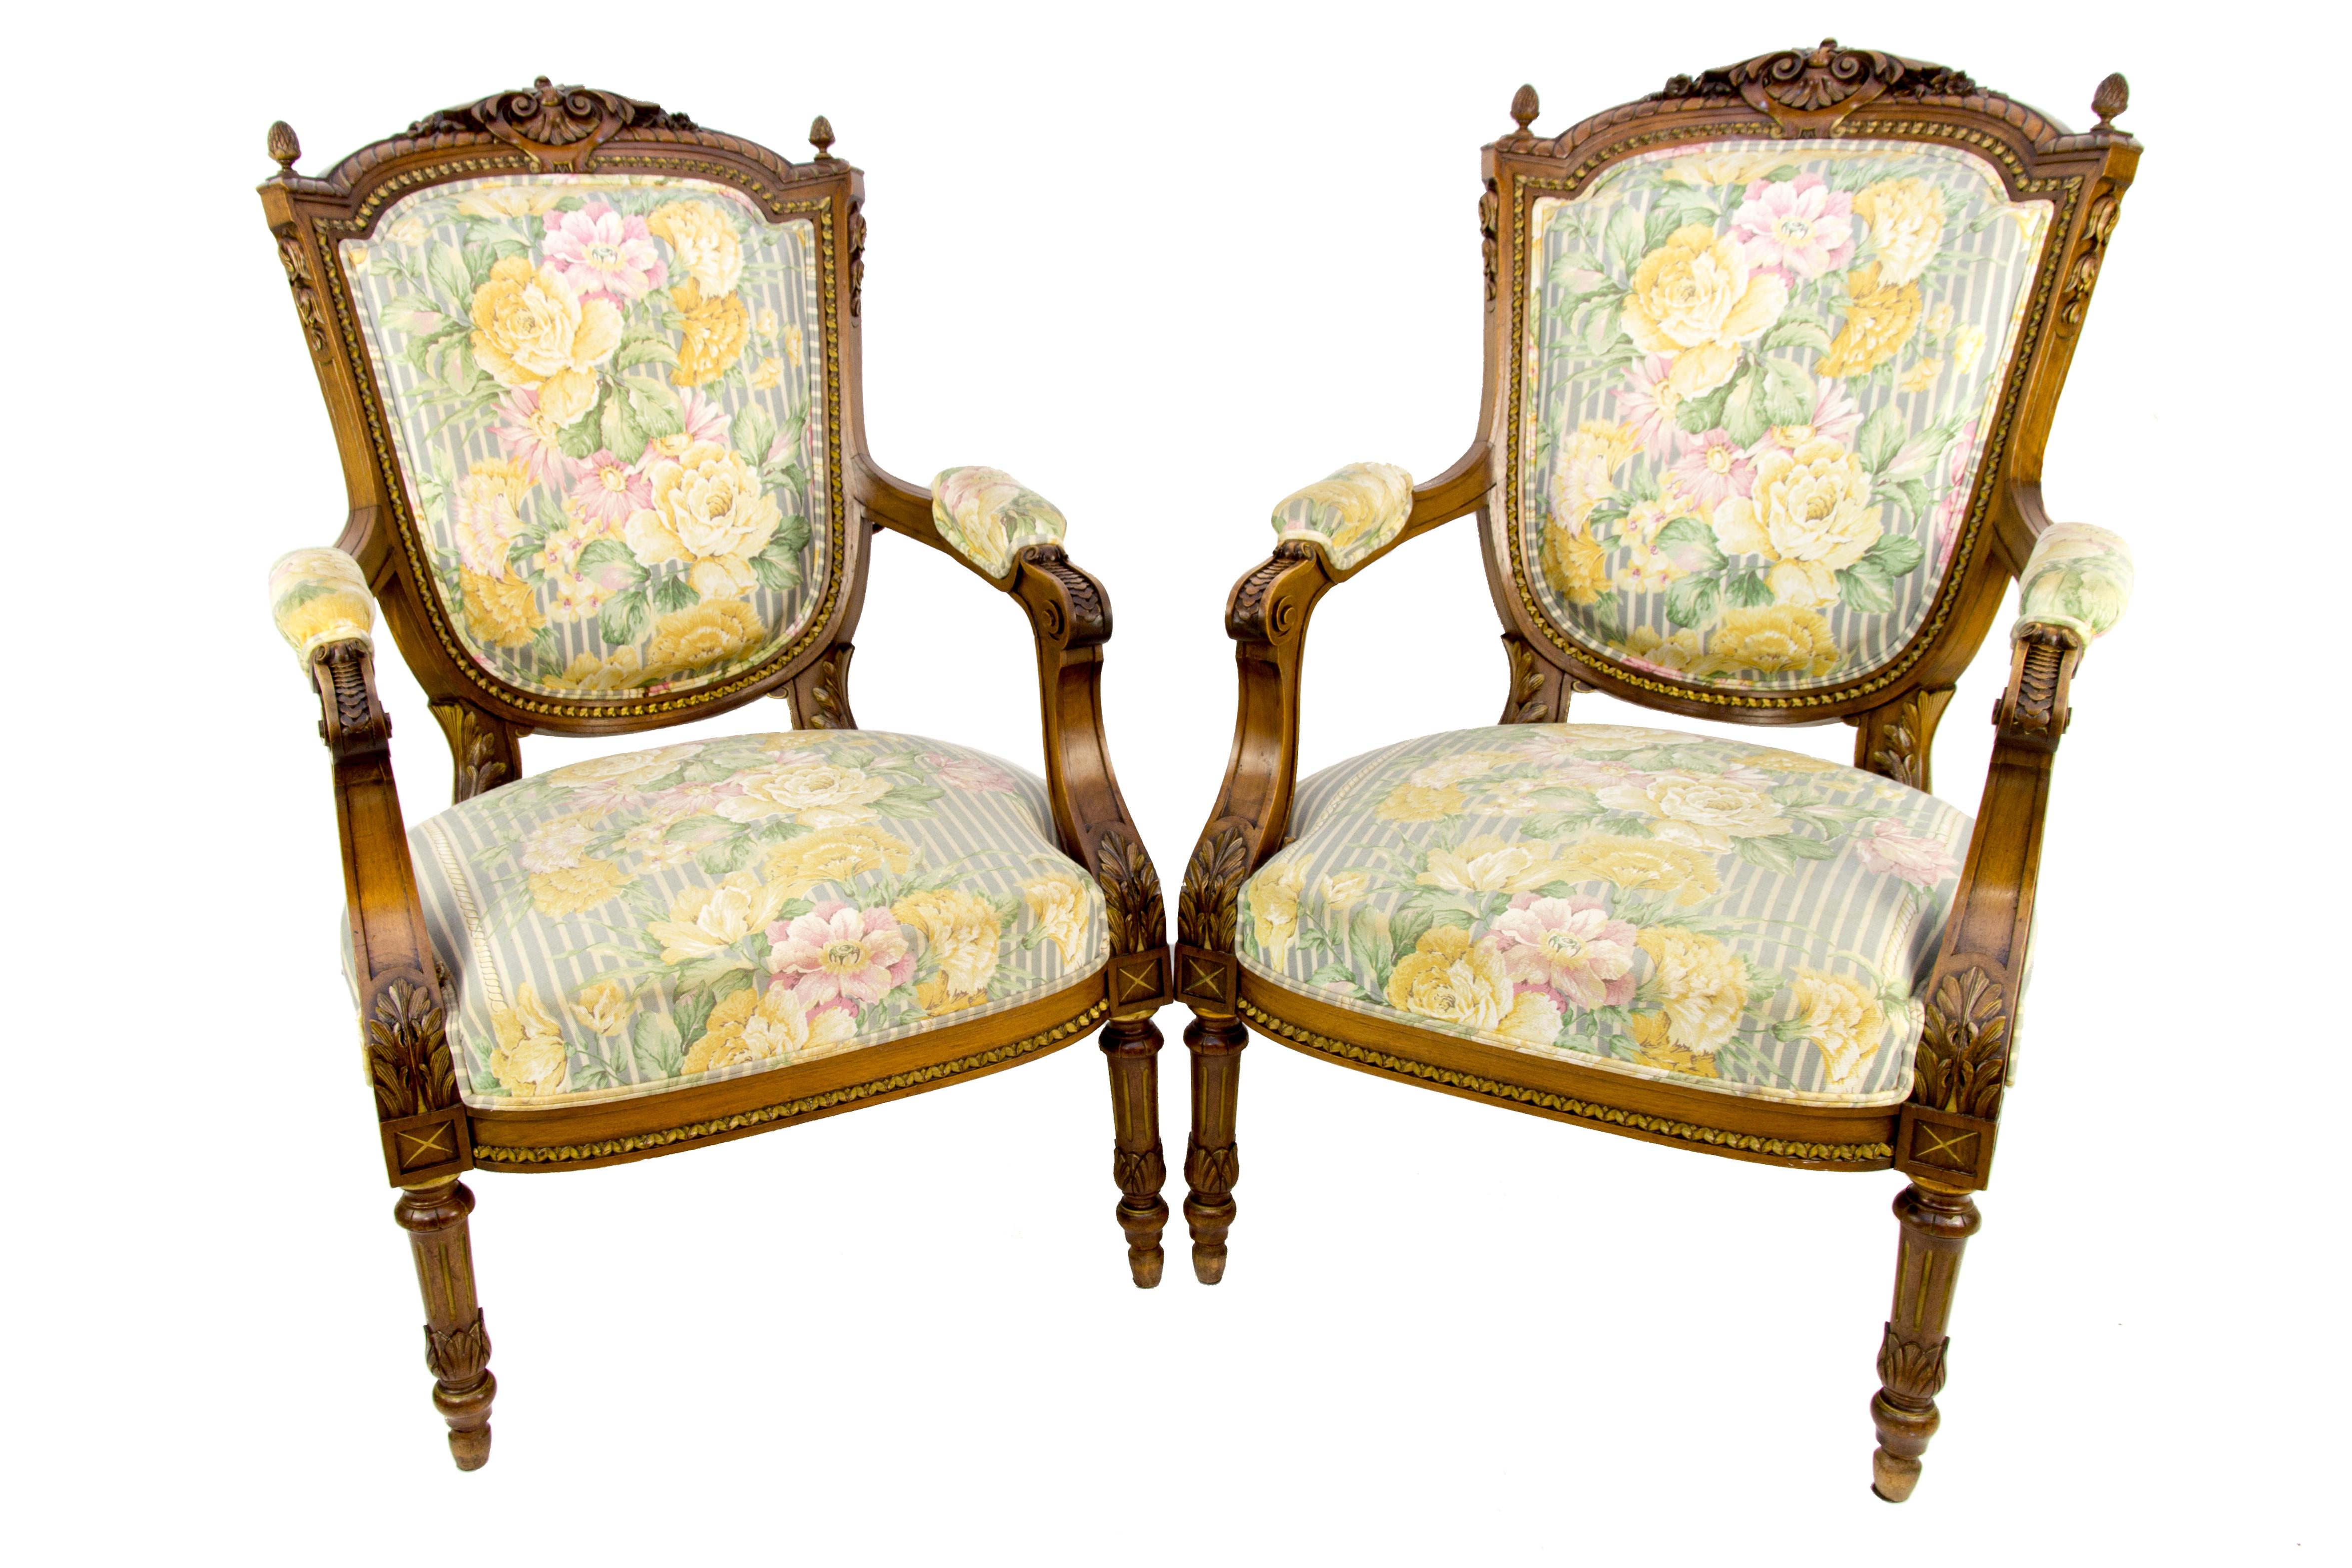 Pair of beautifully carved Louis XVI style armchairs (or Fauteuils) with giltwood details, made of walnut in the late 19th century. Wonderful quality hand carved acanthus leaves and foliate decoration carvings around frame, raised on turned tapering